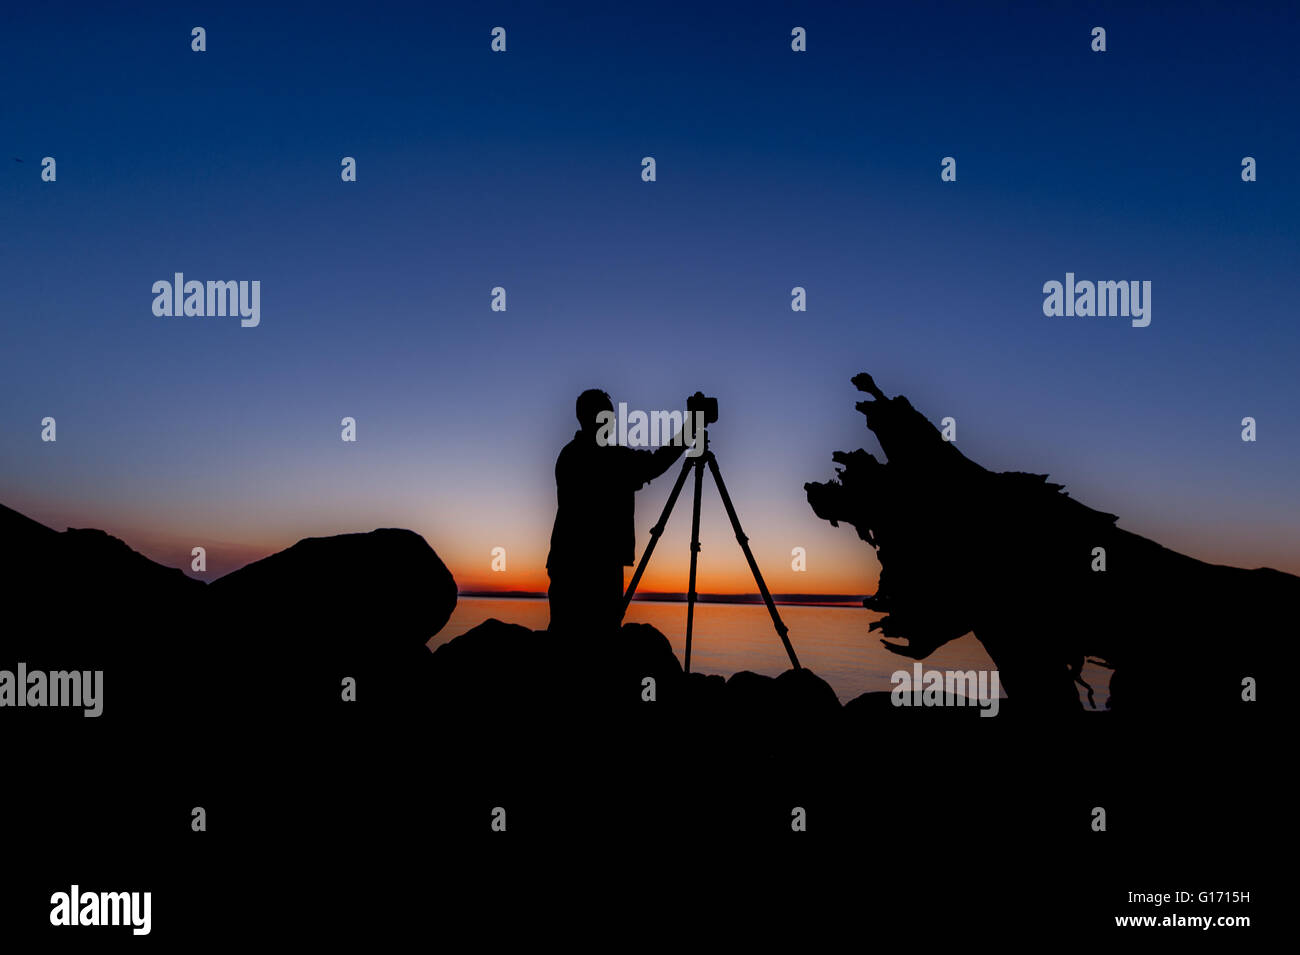 Image of a photographer changing lenses at night. Stock Photo